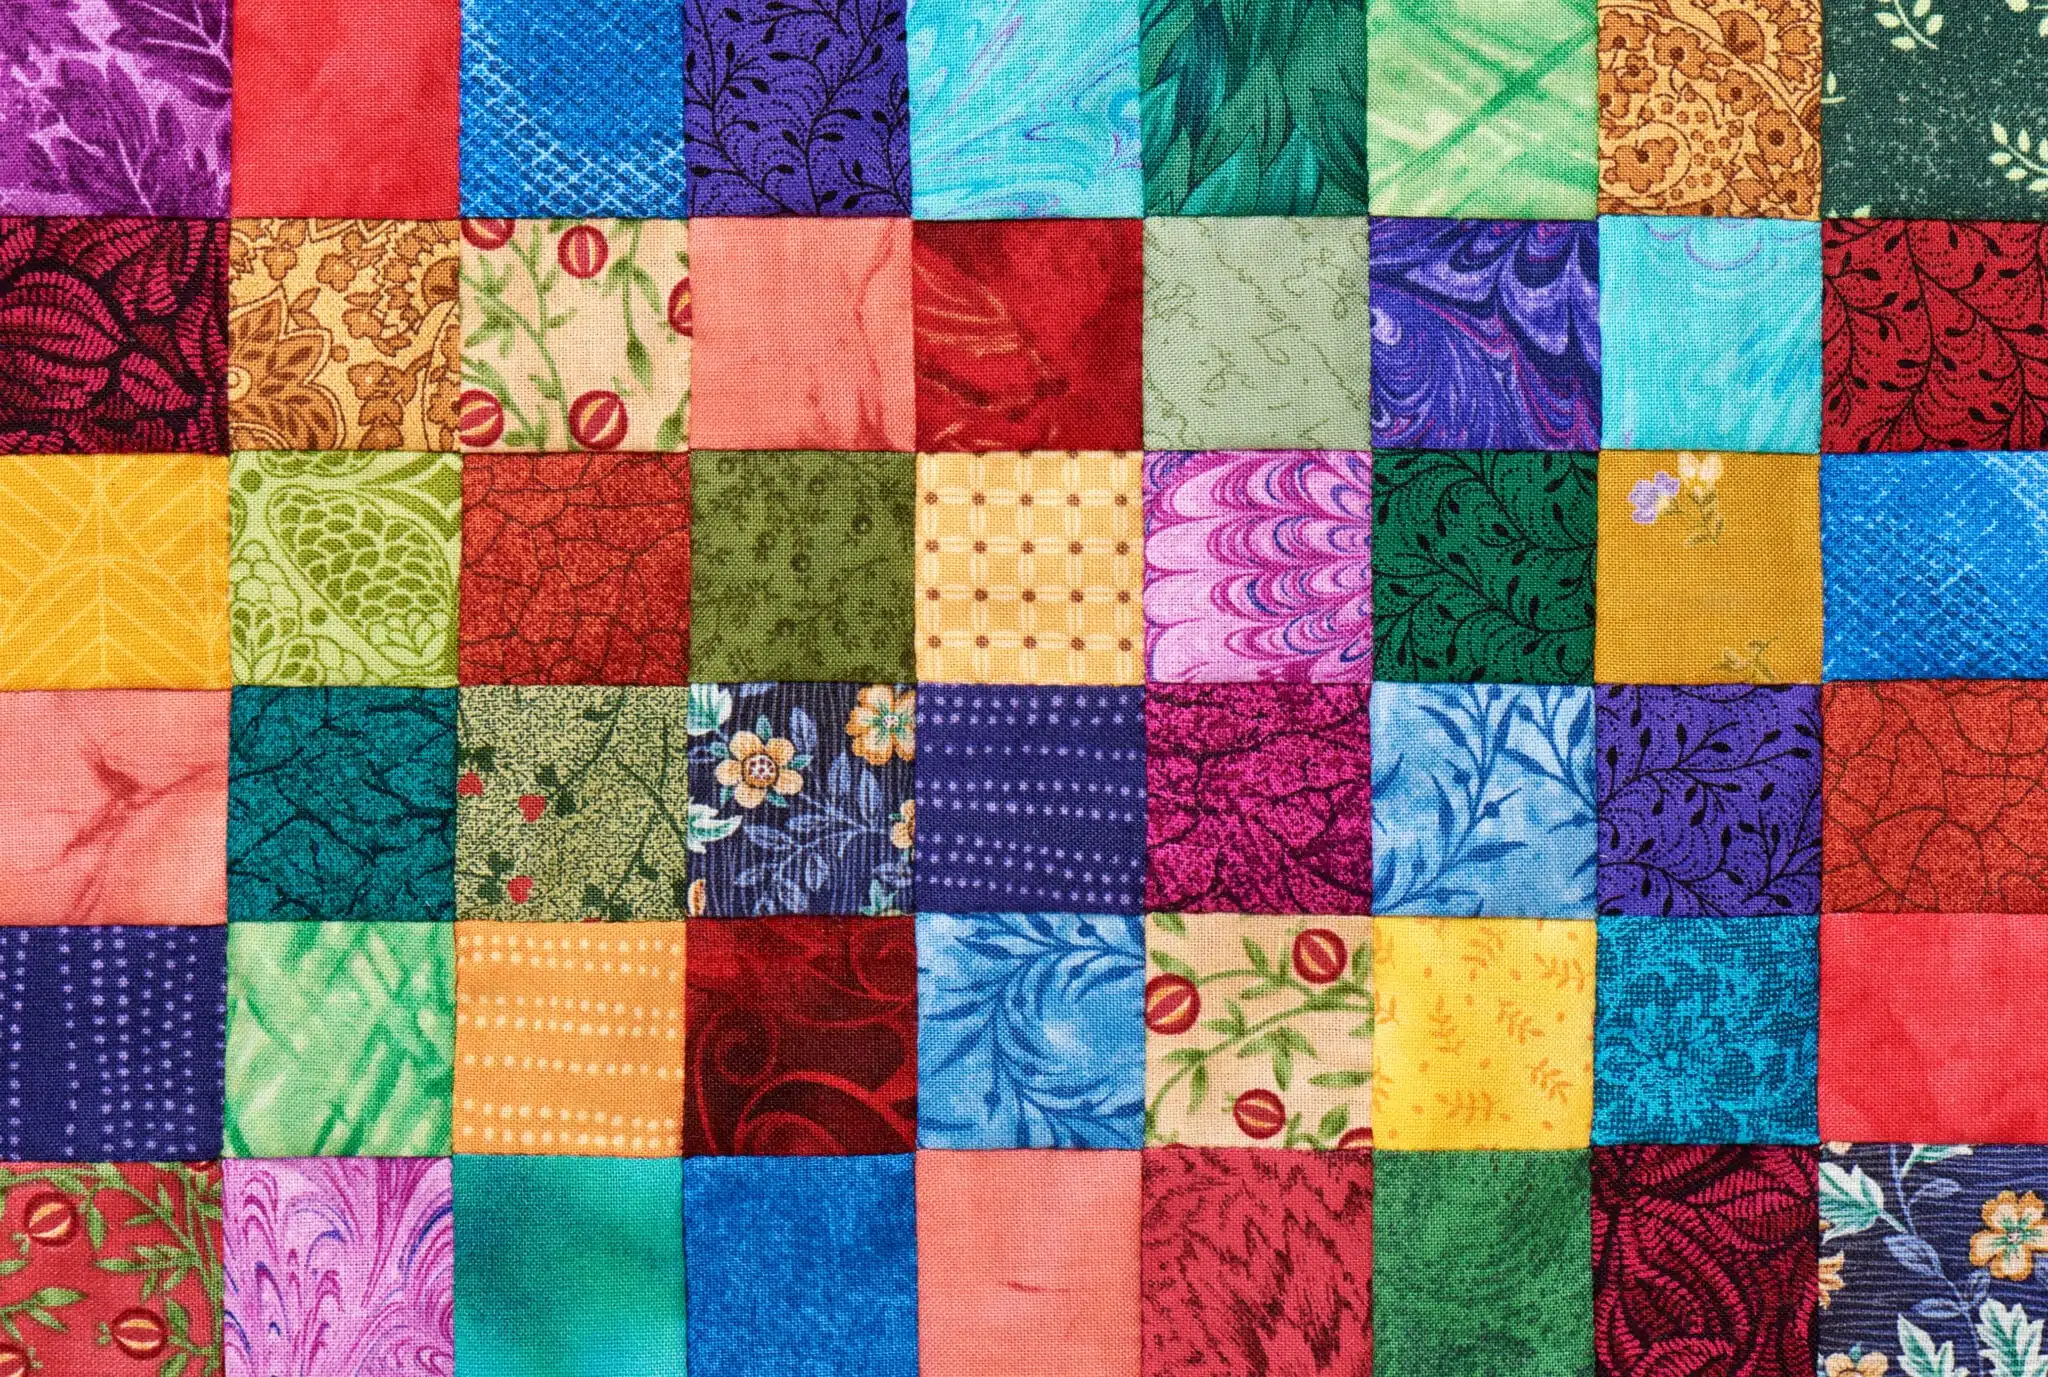 Colorful detail of quilt sewn from square pieces